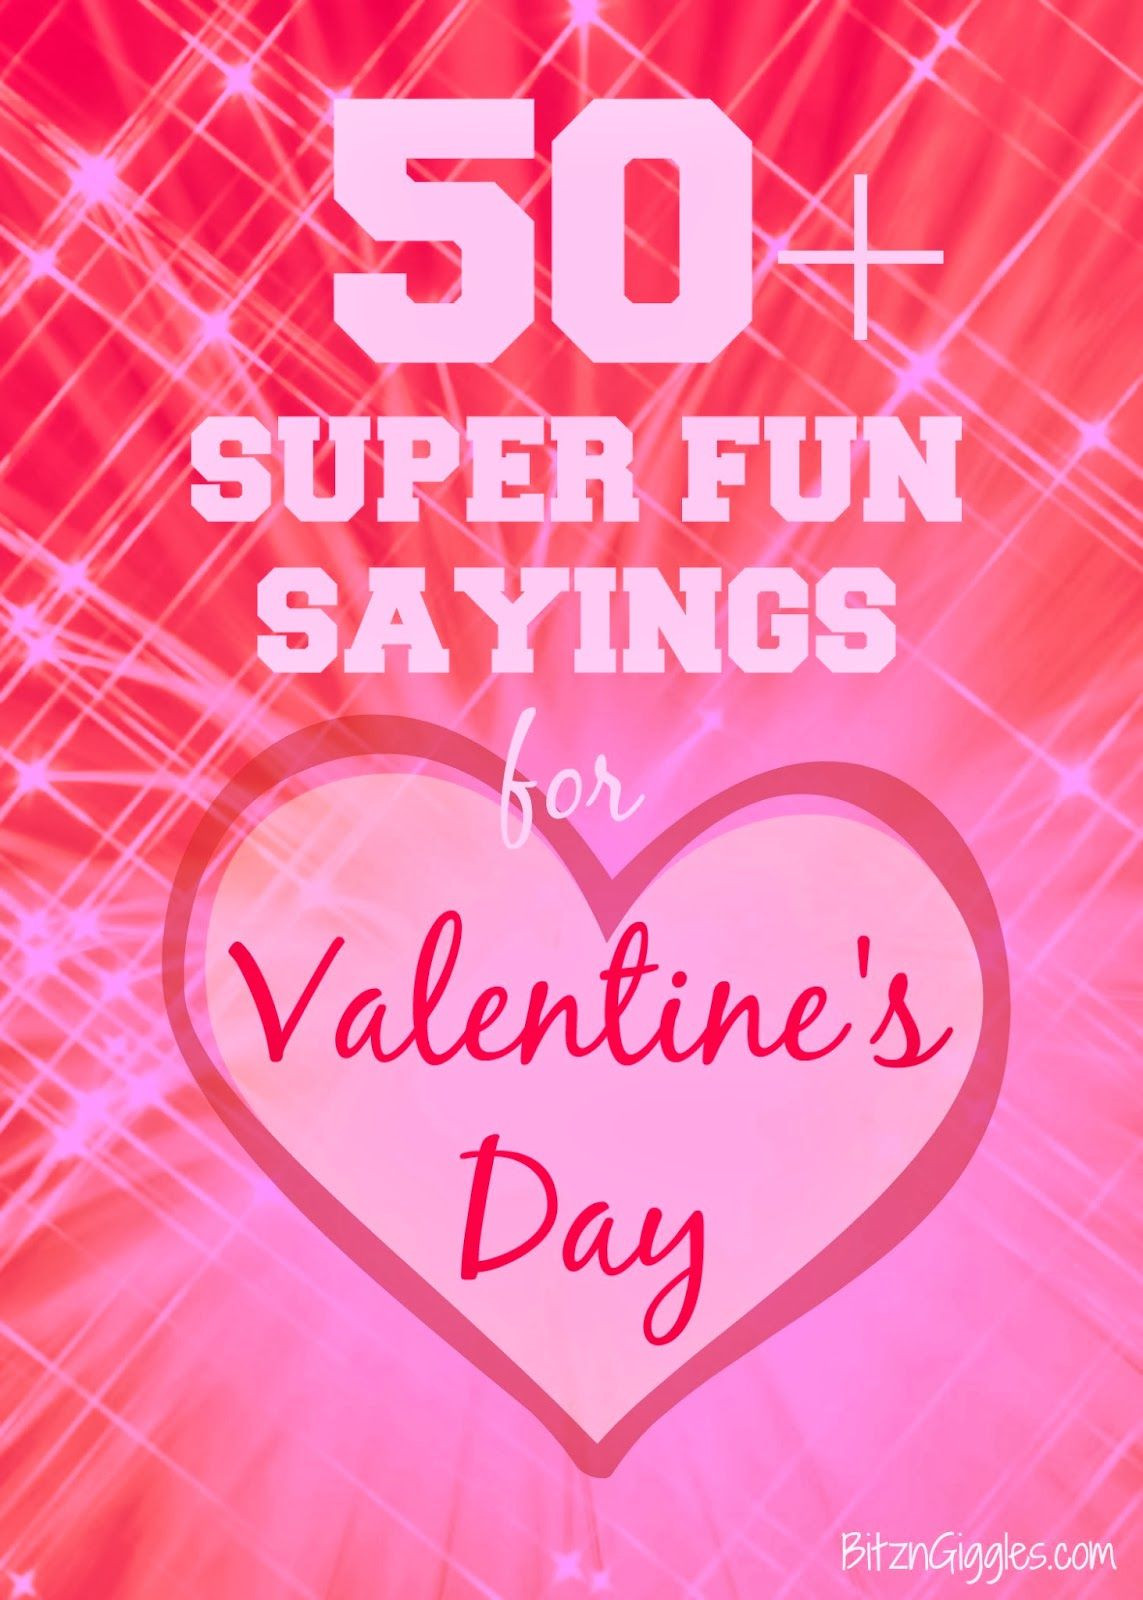 Quotes For Valentines Day Cards
 50 Super Fun Sayings for Valentine s Day